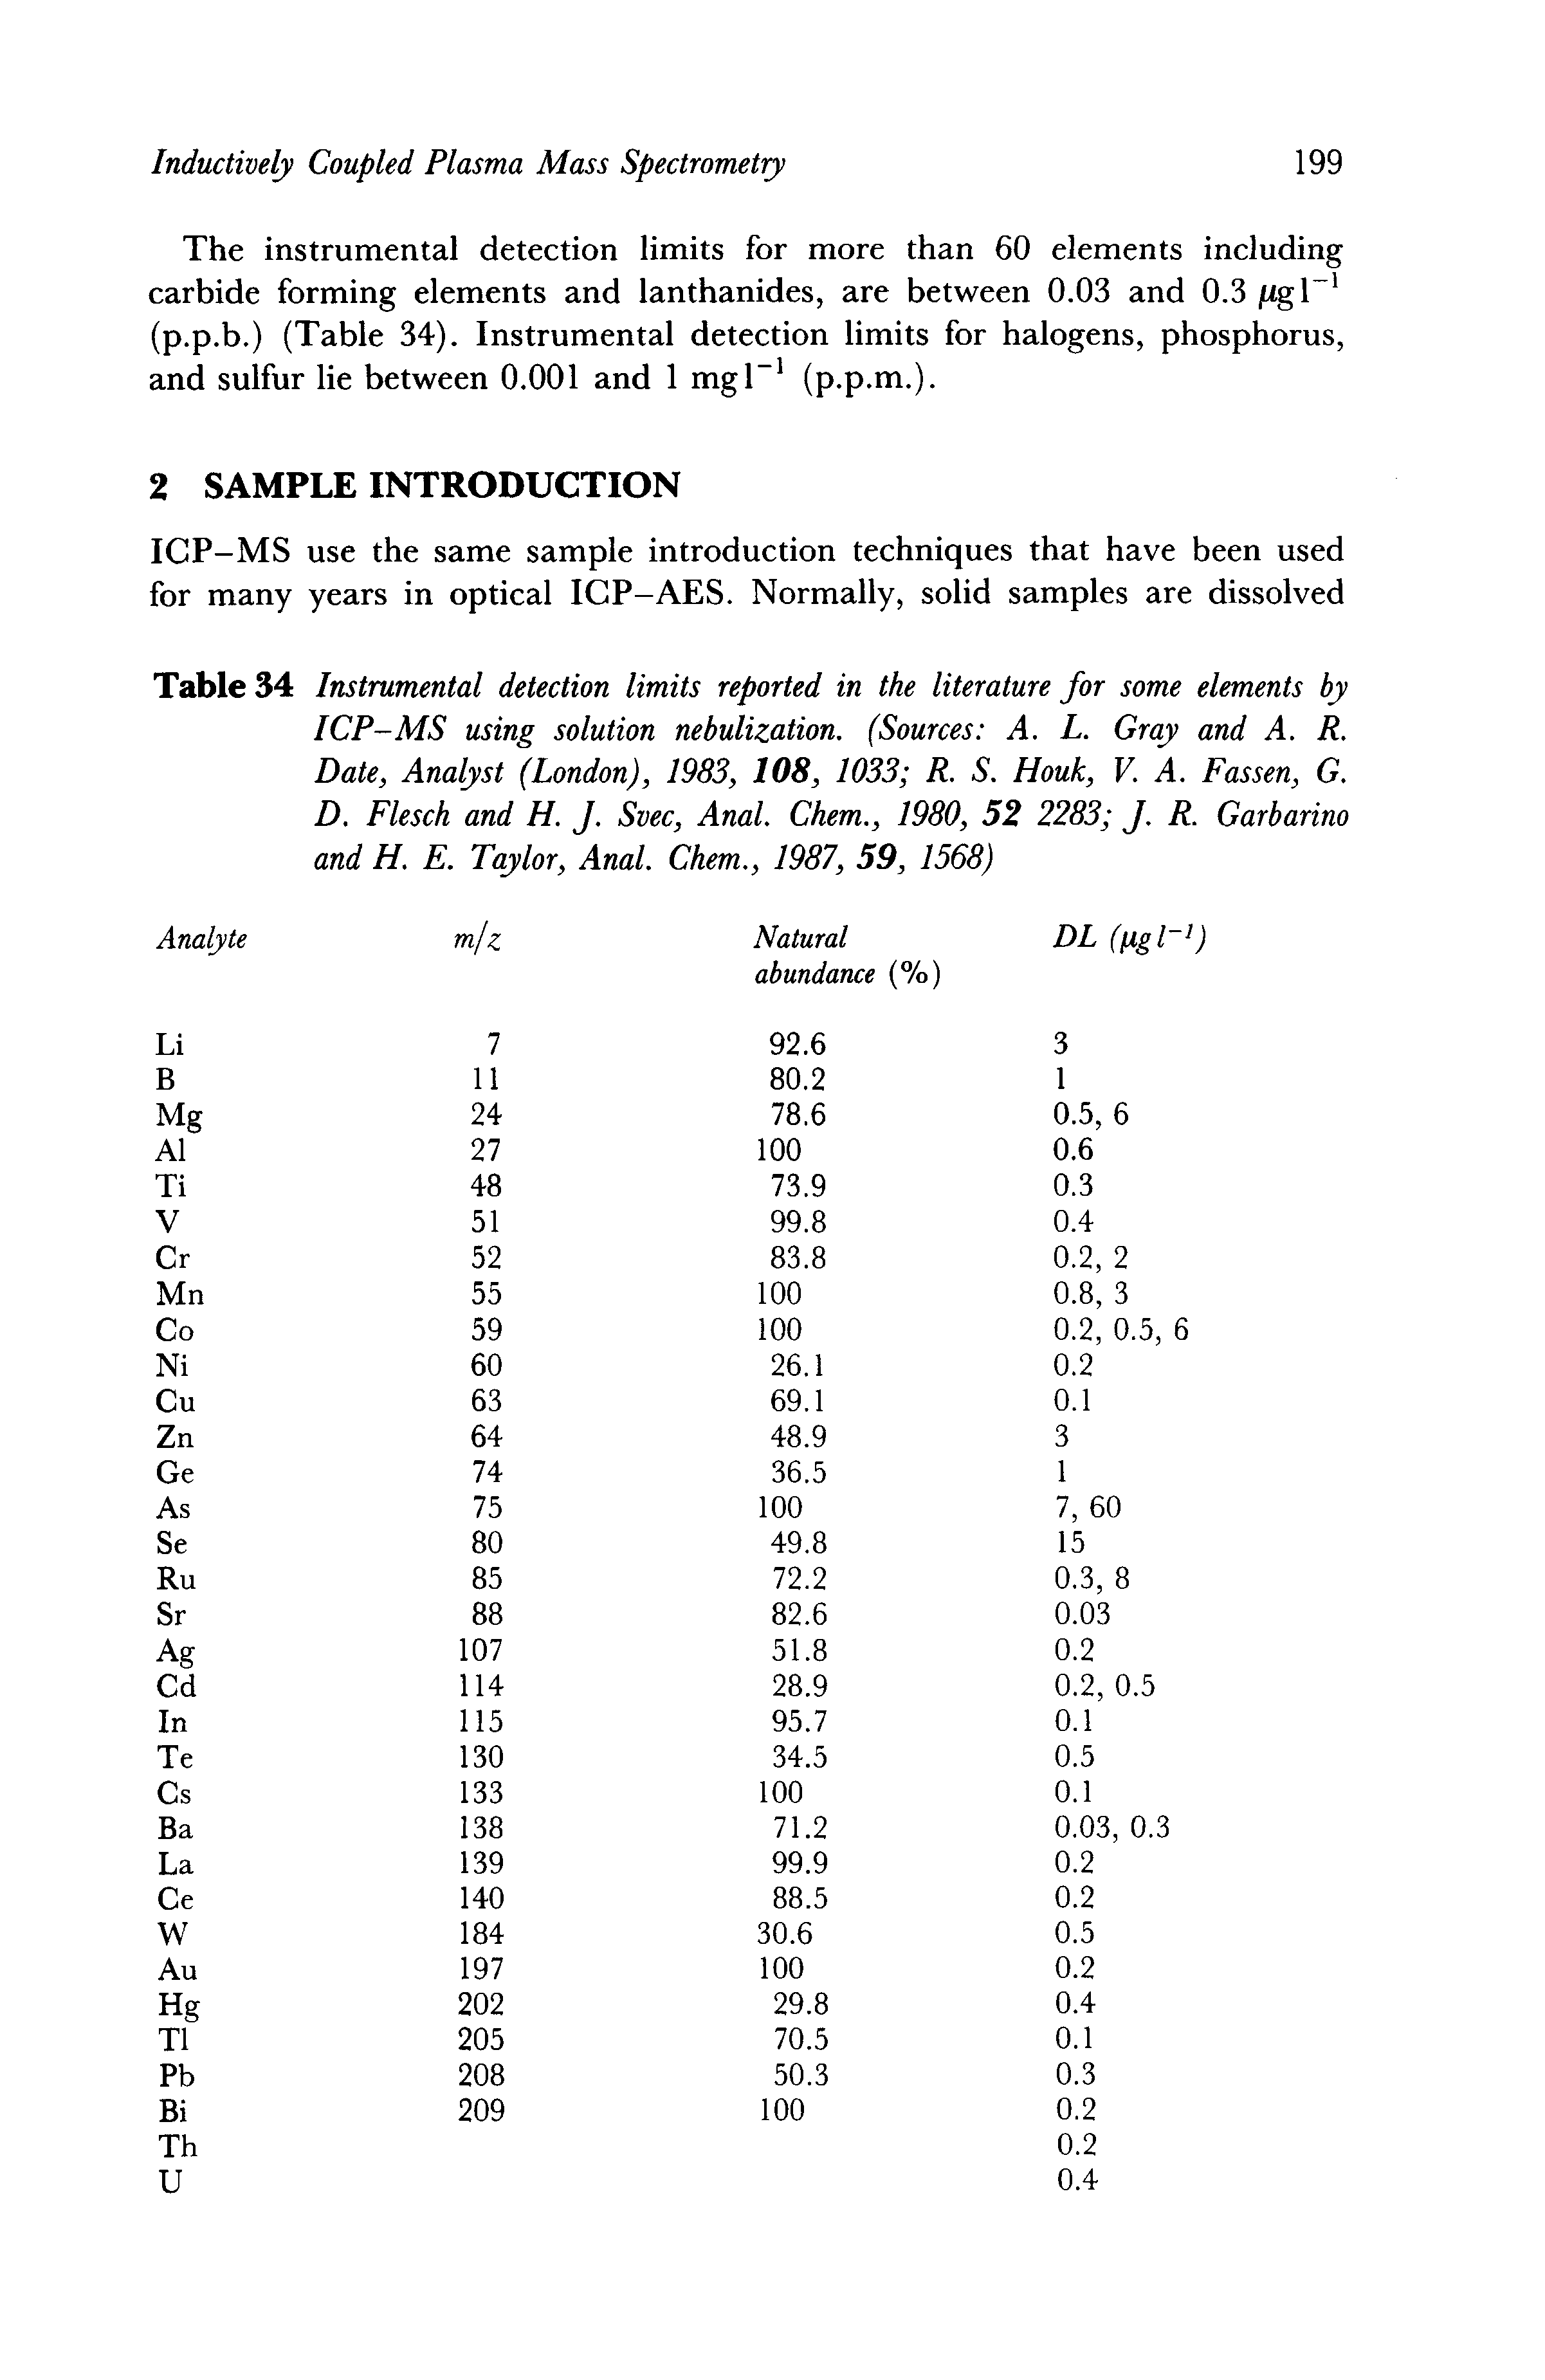 Table 34 Instrumental detection limits reported in the literature for some elements by ICP-MS using solution nebulization. (Sources A. L. Gray and A. R. Date, Analyst (London), 1983, 108, 1033 R. S. Houk, V. A. Fassen, G. D. Flesch and H. J. Svec, Anal. Chem., 1980, 52 2283 J. R. Garbarino and H. E. Taylor, Anal. Chem., 1987, 59, 1568)...